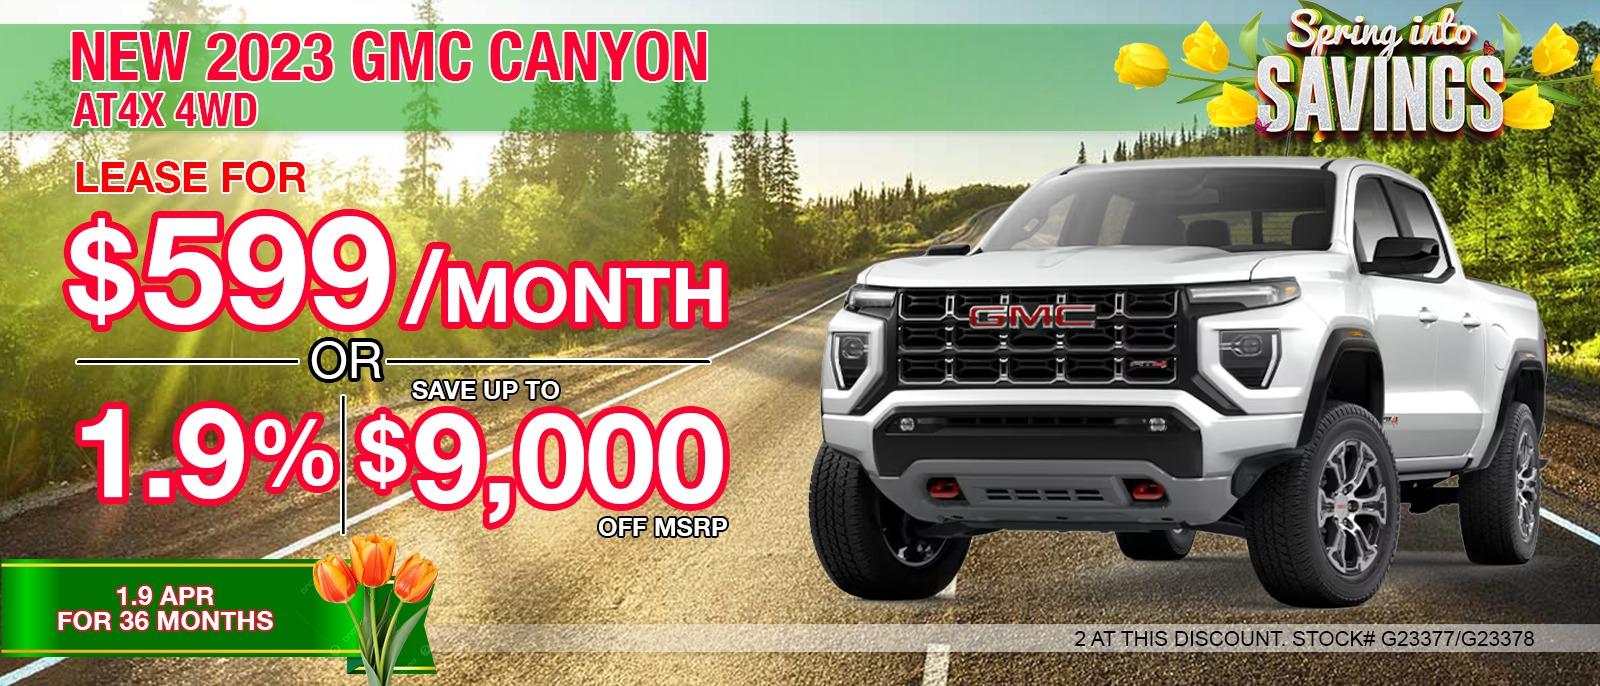 2023 GMC CANYON ATX4 4WD. Your Net Savings After All Offers $9,000 OFF MSRP.